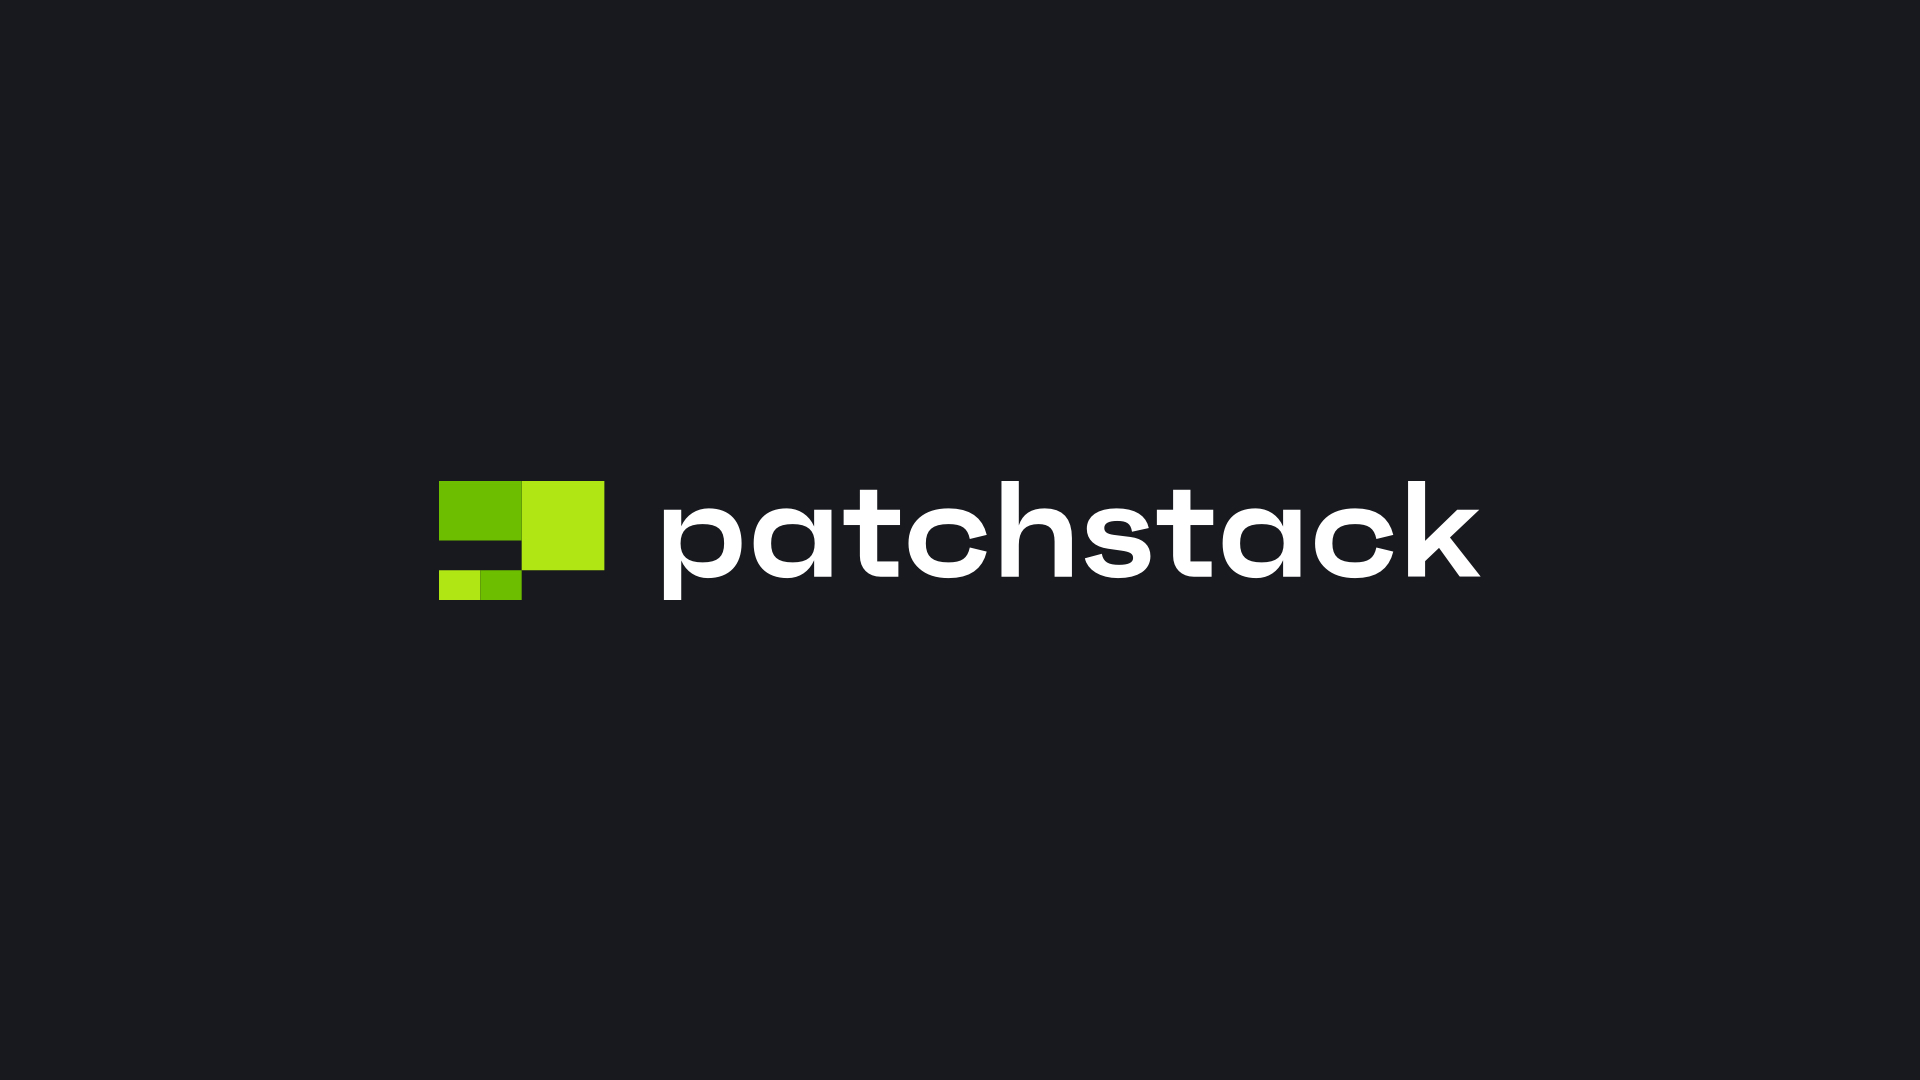 Patchstack Reports 404 Vulnerabilities Affecting 1.6M+ Websites to WordPress.org Plugins Team